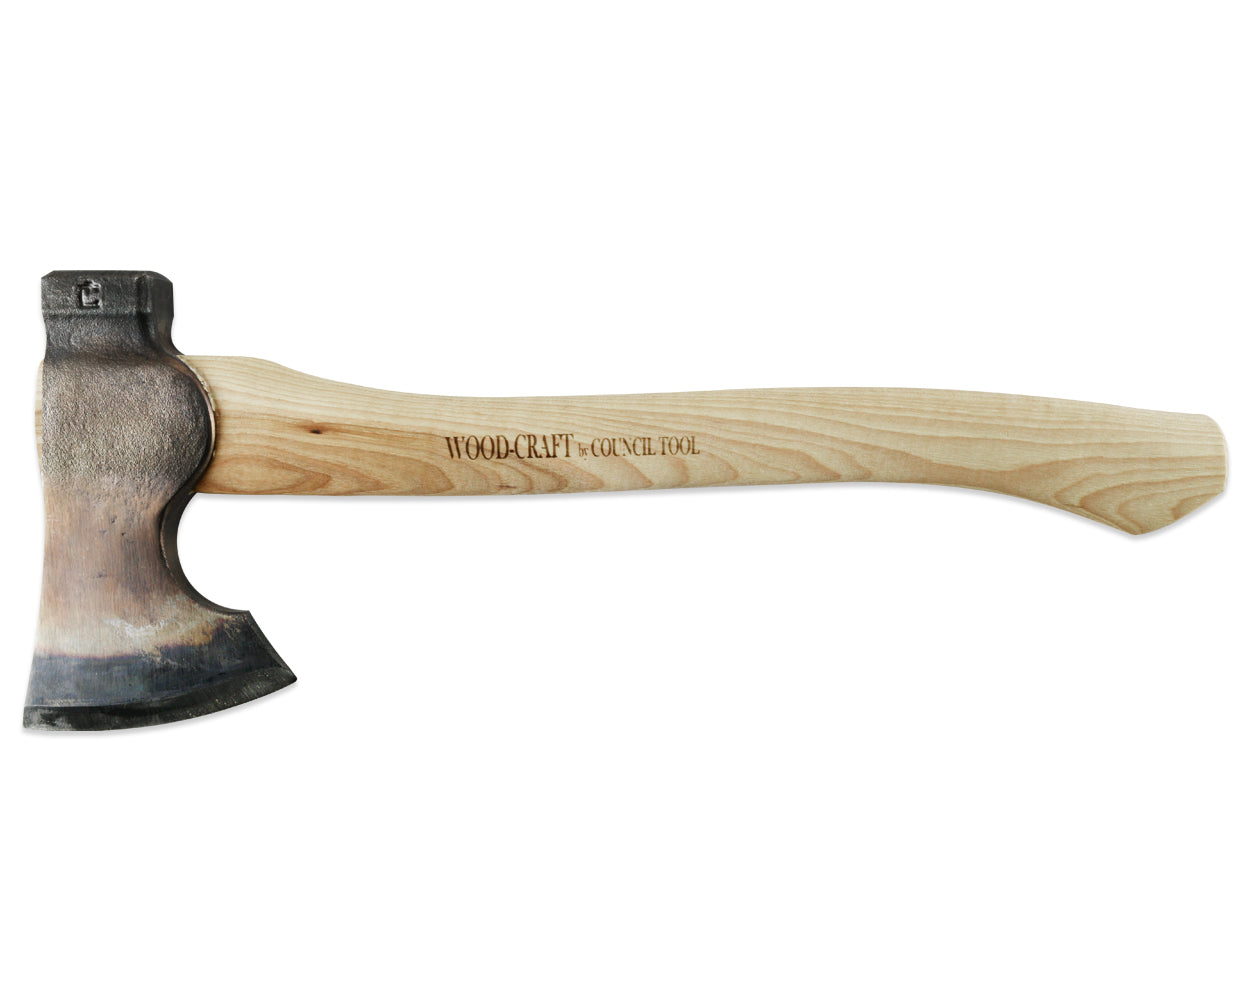 2lb Wood-Craft Camp Carver, 16" Curved Handle with Leather Mask